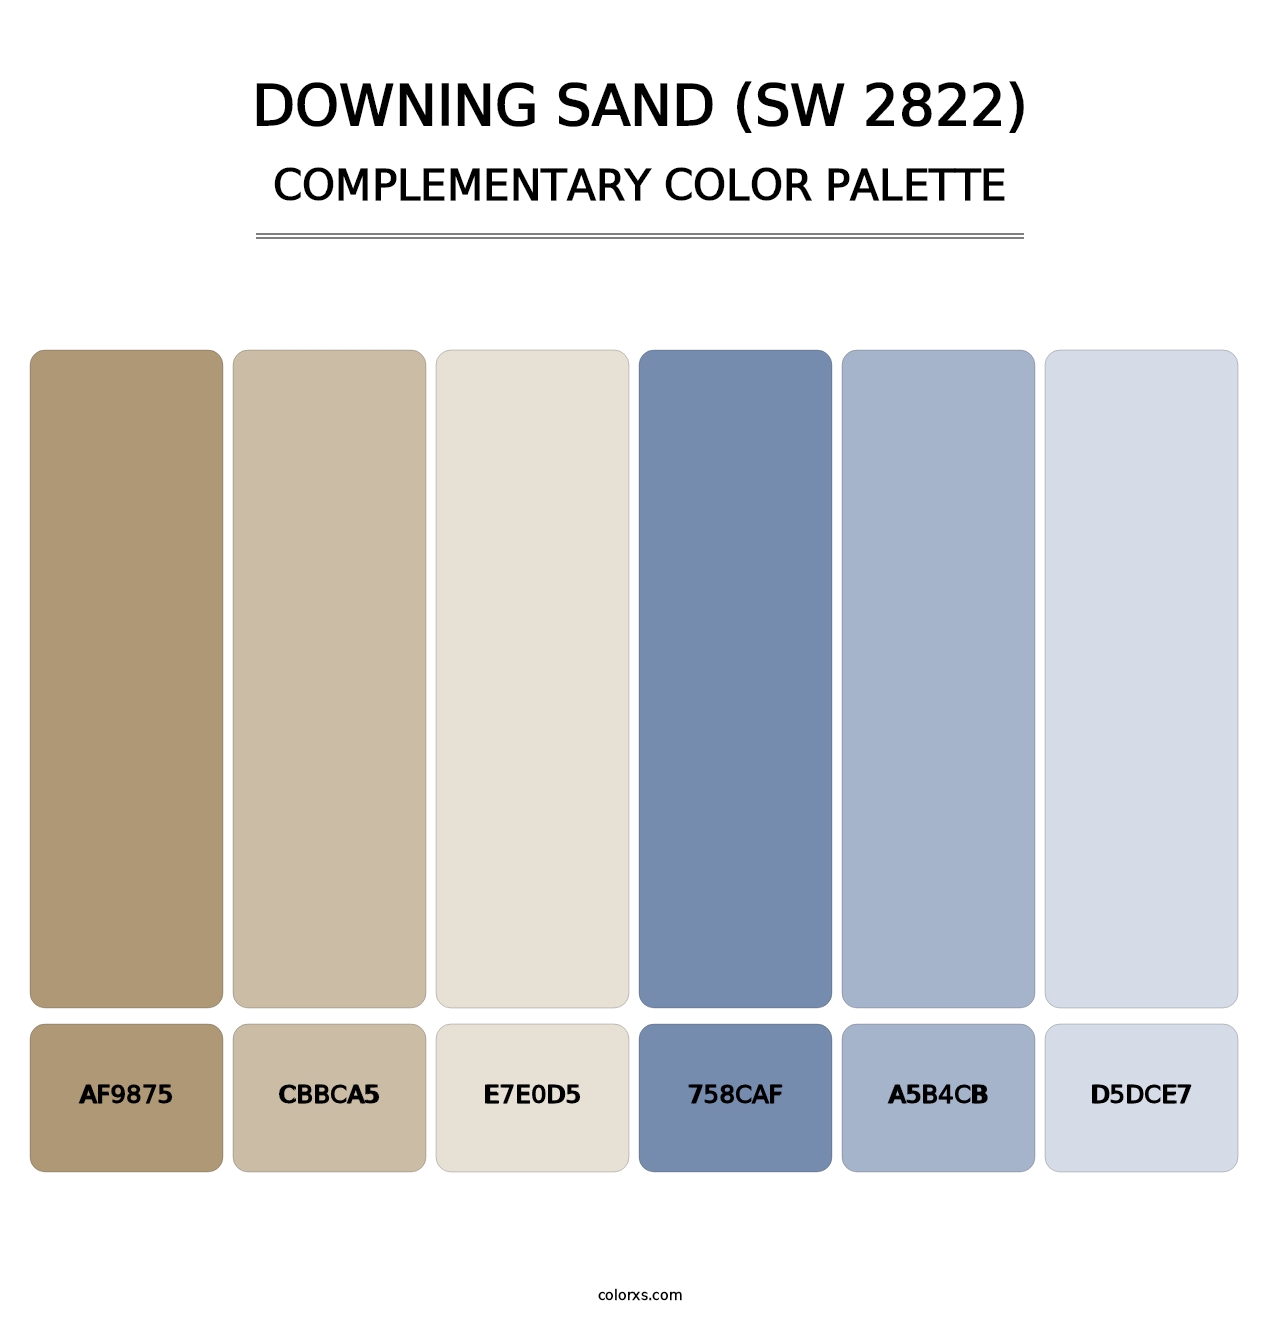 Downing Sand (SW 2822) - Complementary Color Palette